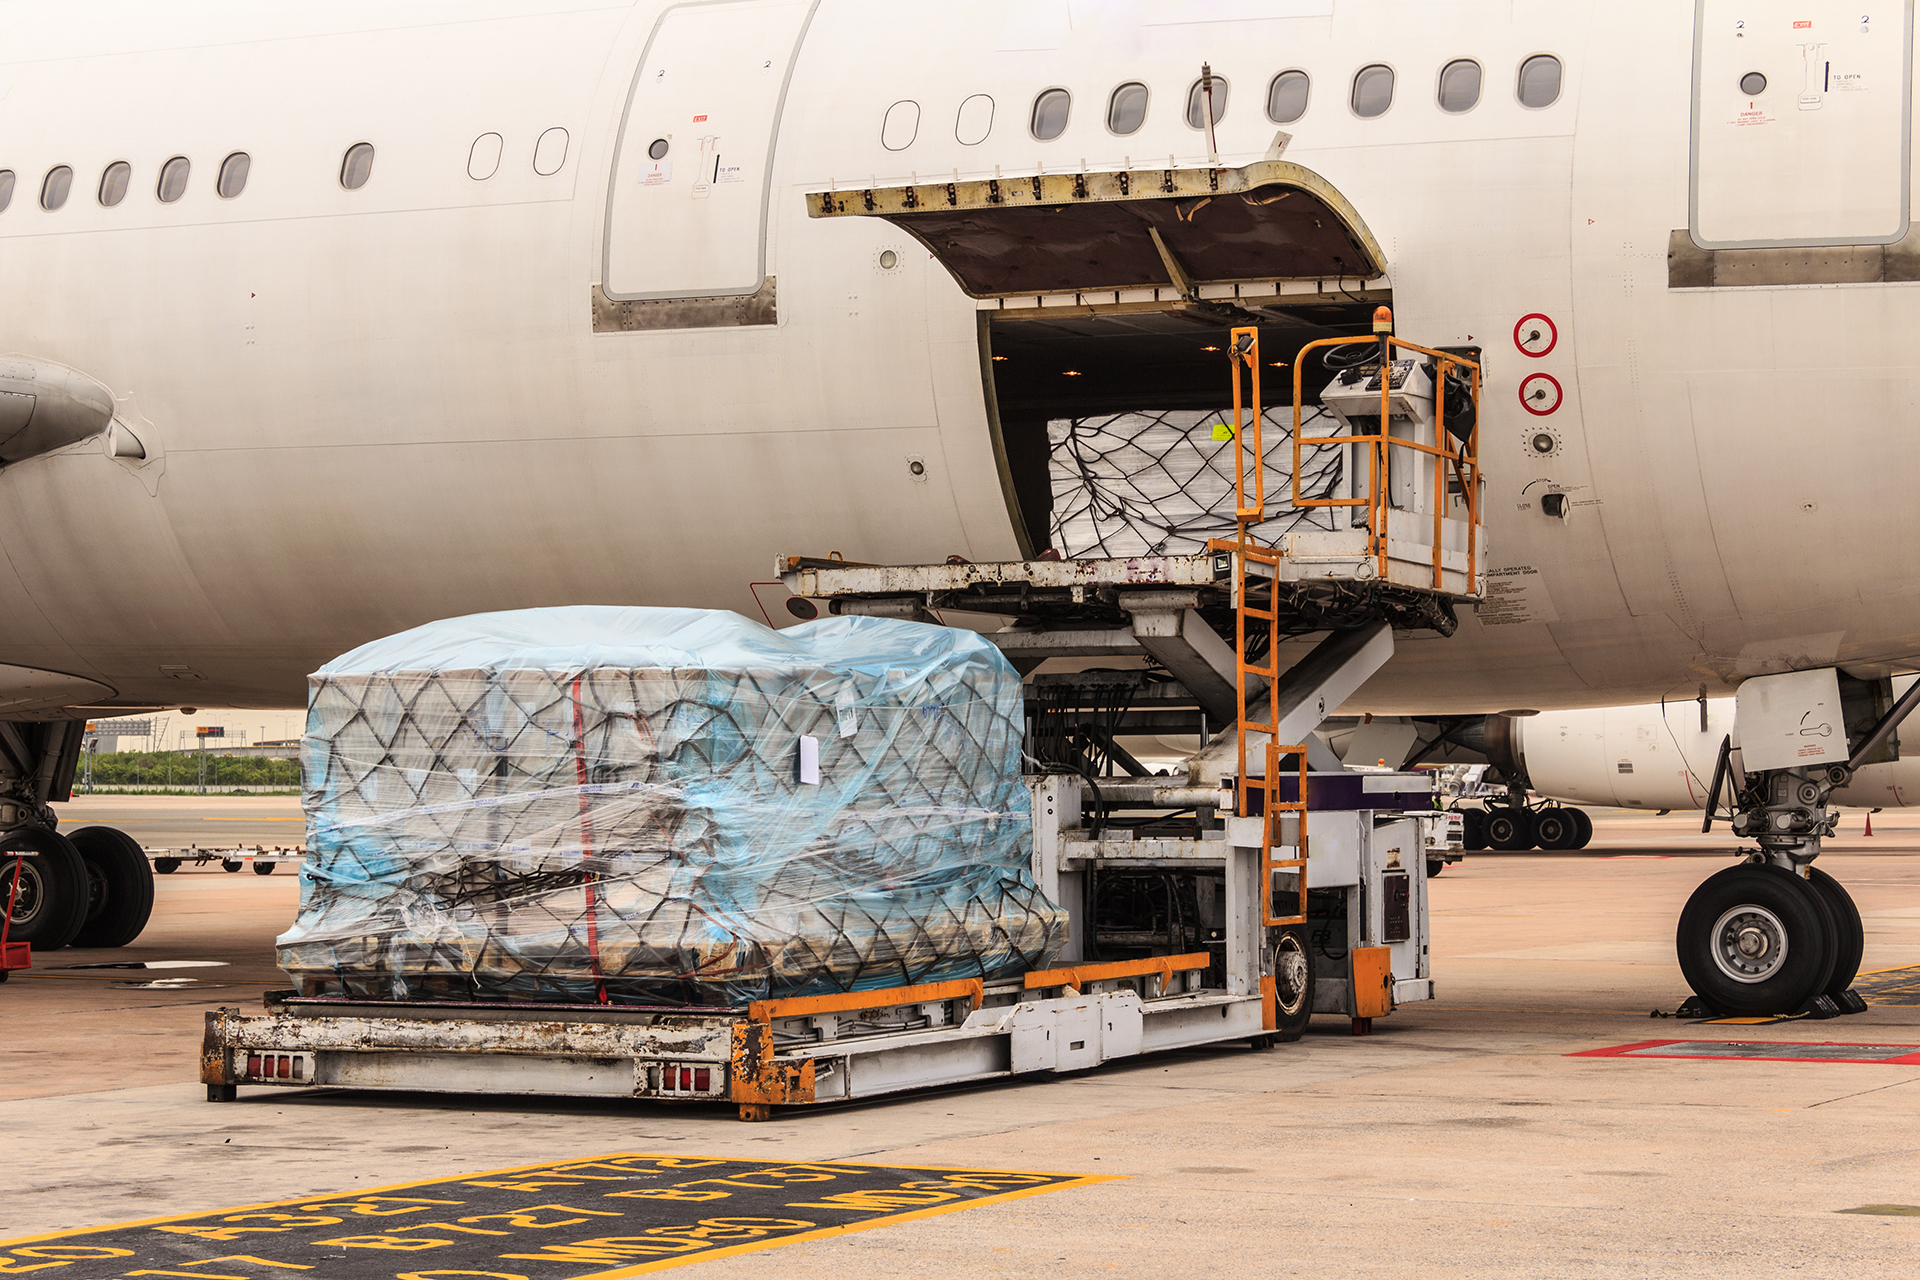 2020 Worst Year for Air Cargo Demand Since Performance Monitoring Began